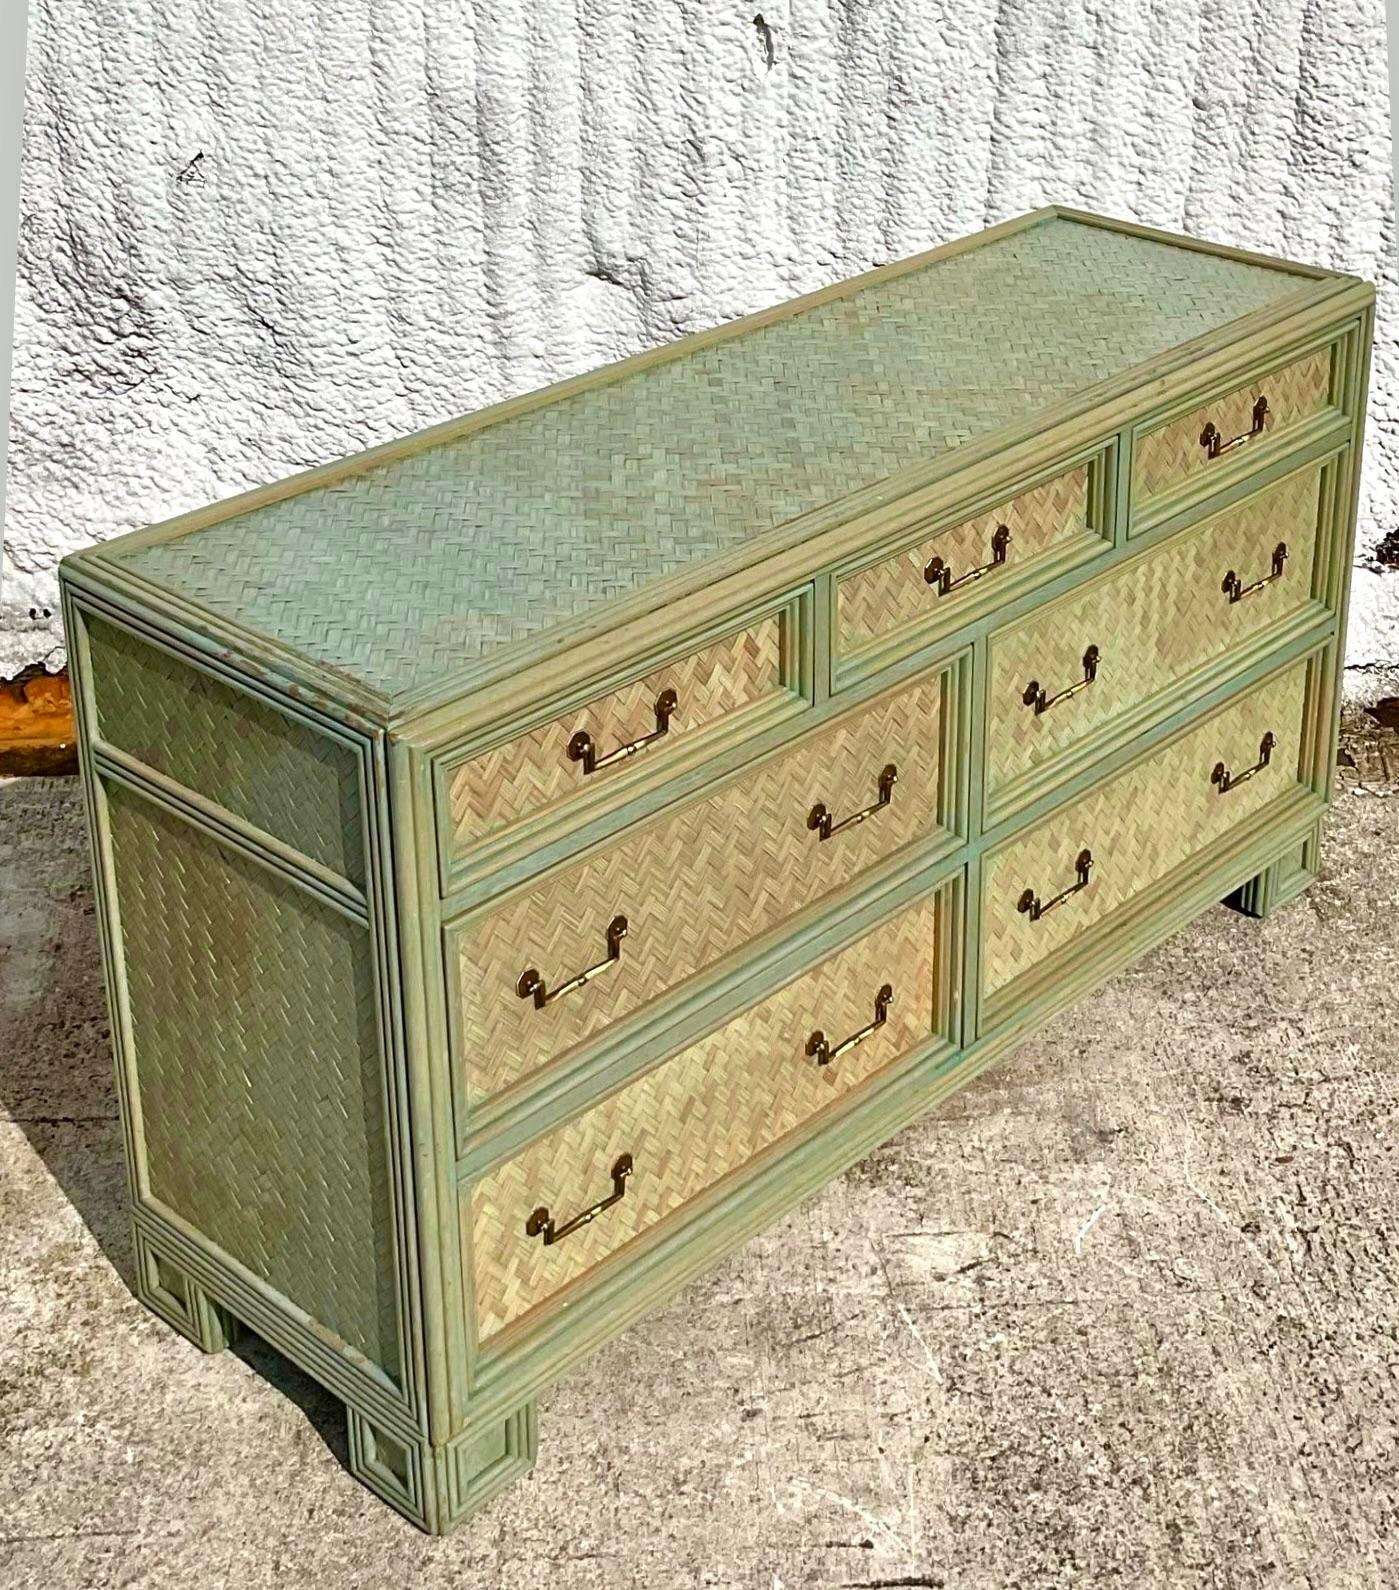 Incredible stained chevron seven drawer dresser. Gorgeous drop handle pulls. Collectible design with a fun twist in the color story almost a celadon green. More pieces from this suite are available on our page. Acquired from a Palm Beach estate.